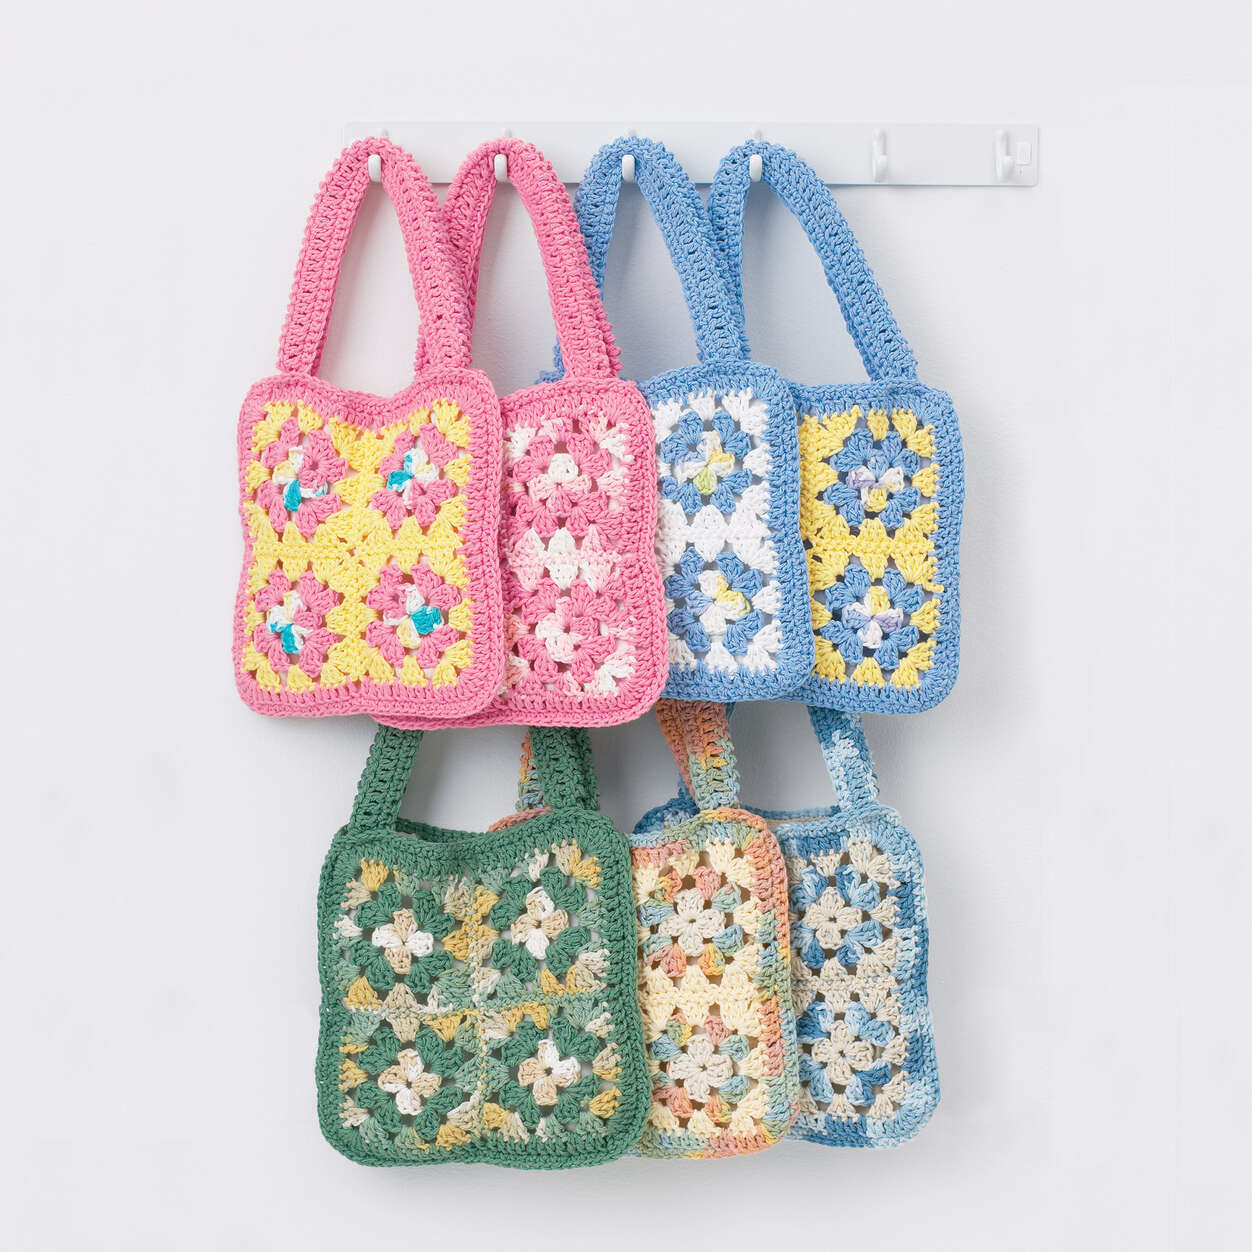 7 Granny Square bags made of 4 multi color squared each side hanging from a coat rack - Marly Bird